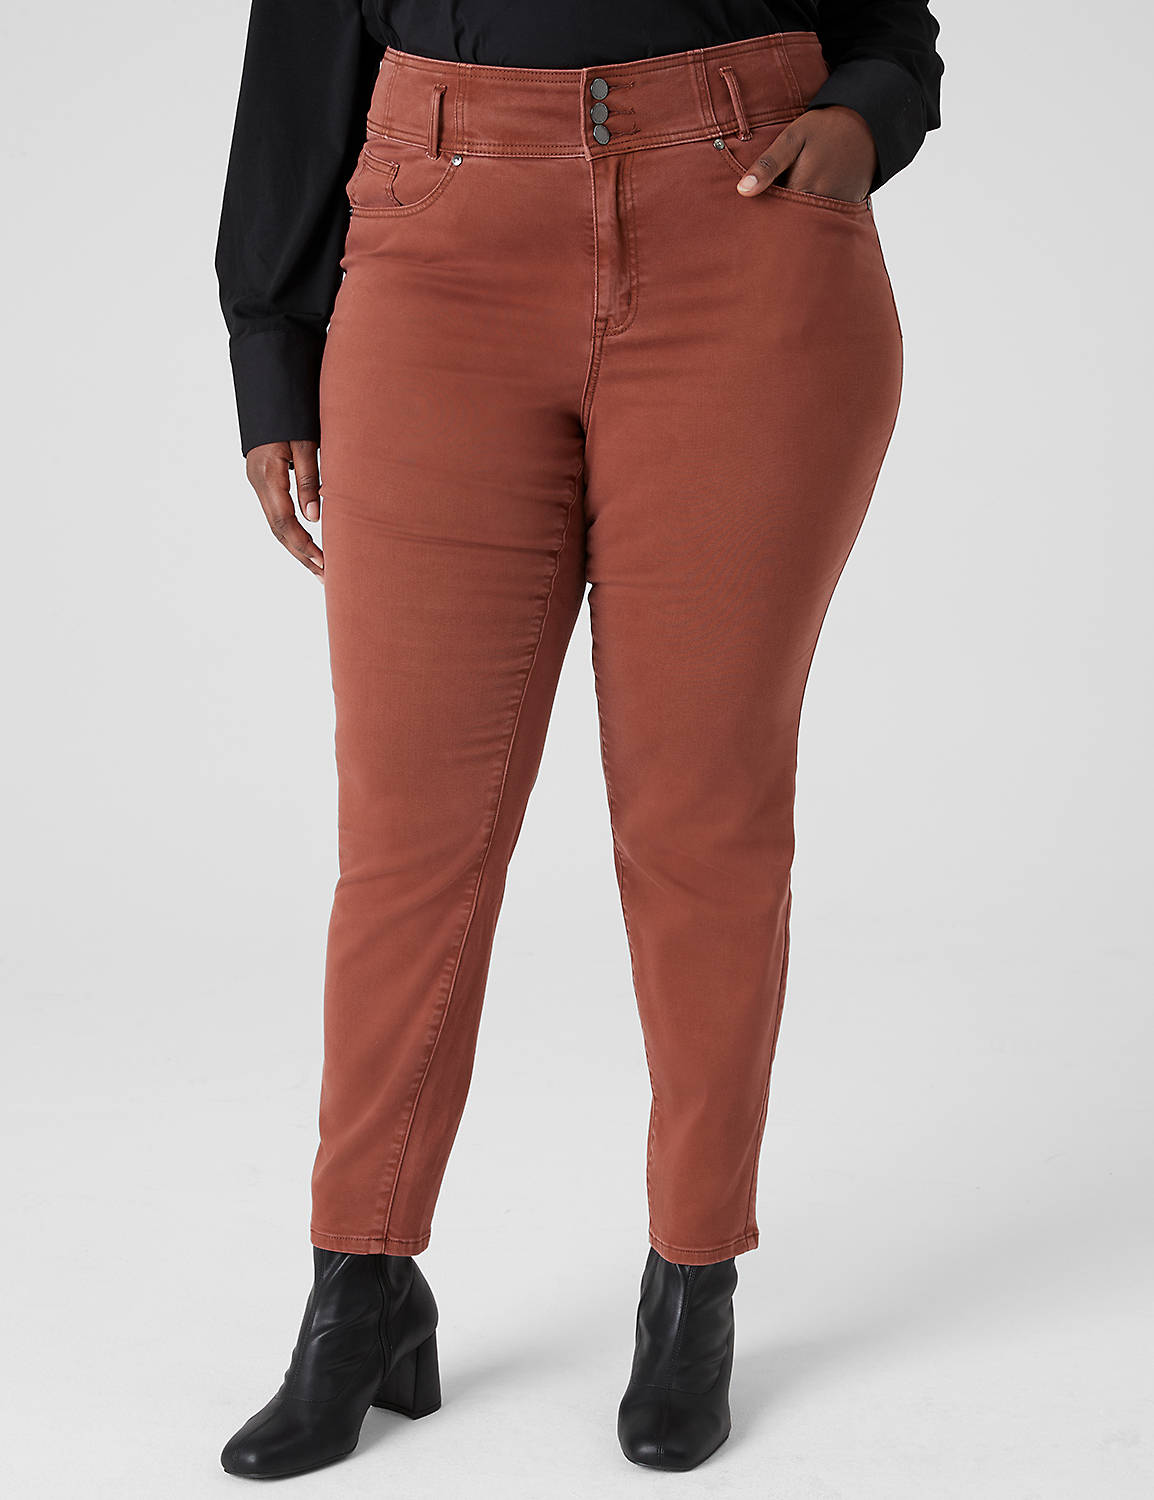 ULTRA HIGH RISE JEGGING - COLOR SAT Product Image 1